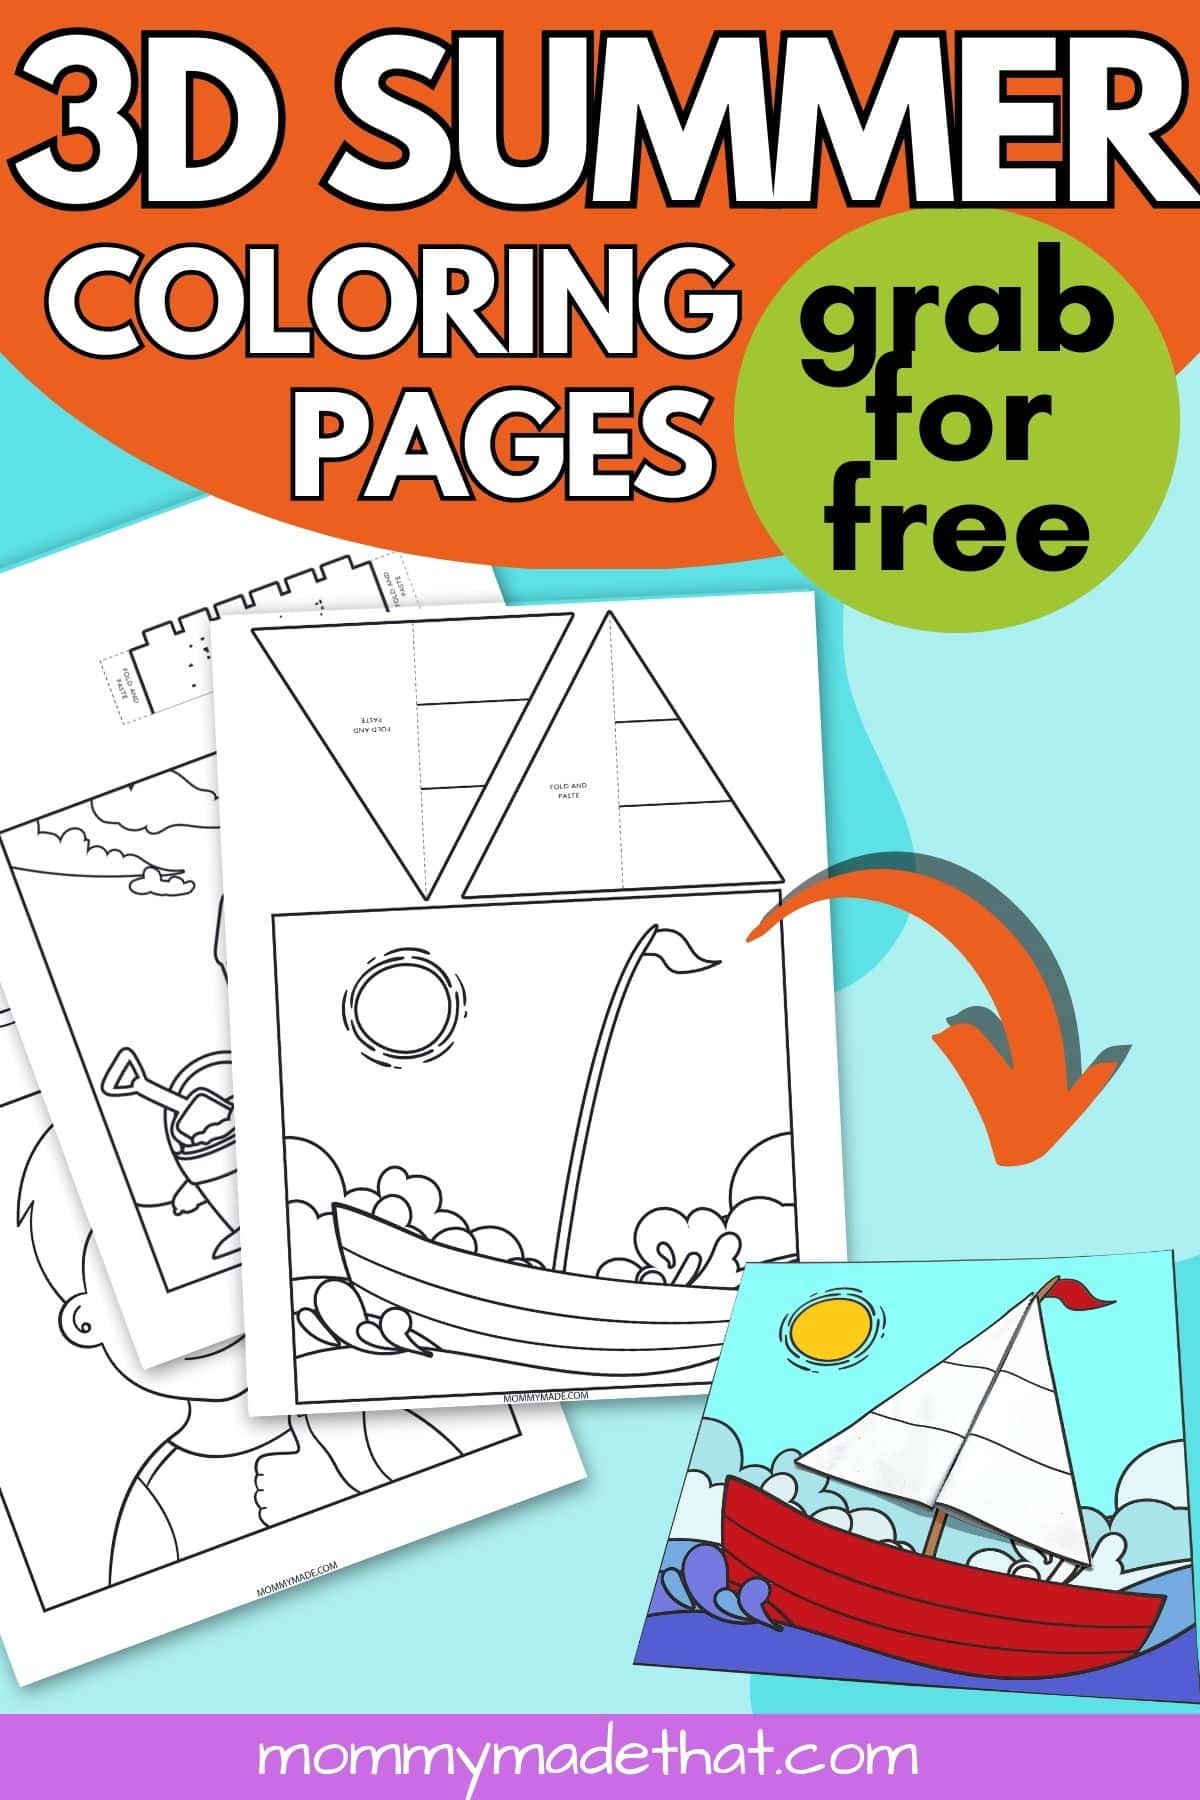 3D summer coloring pages